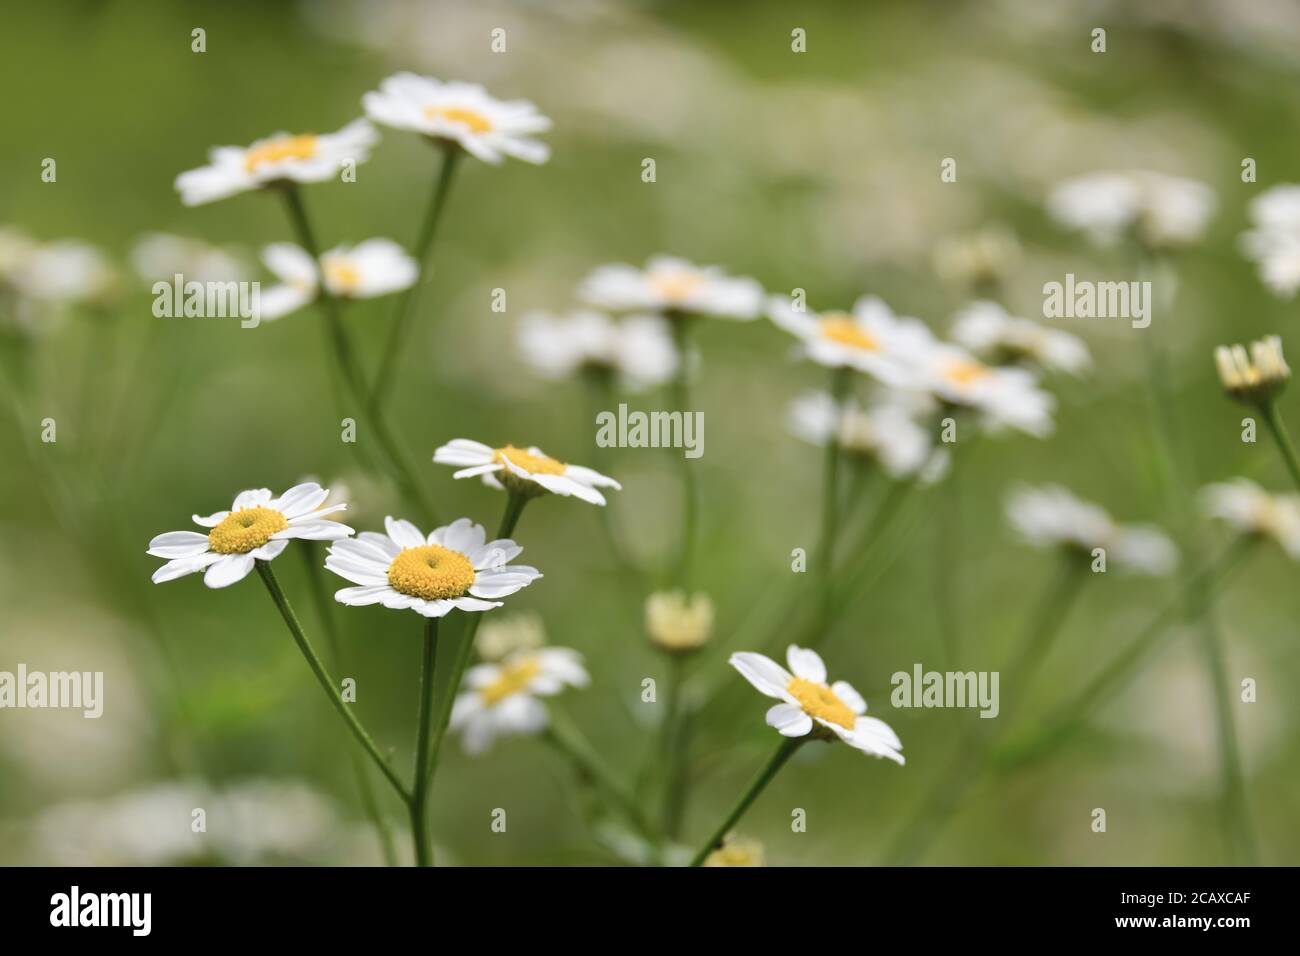 Feverfew, Tanacetum parthenium, flowering plant in the daisy family, Asteraceae. Traditional medicinal herb for fever, headache and arthritis. Stock Photo